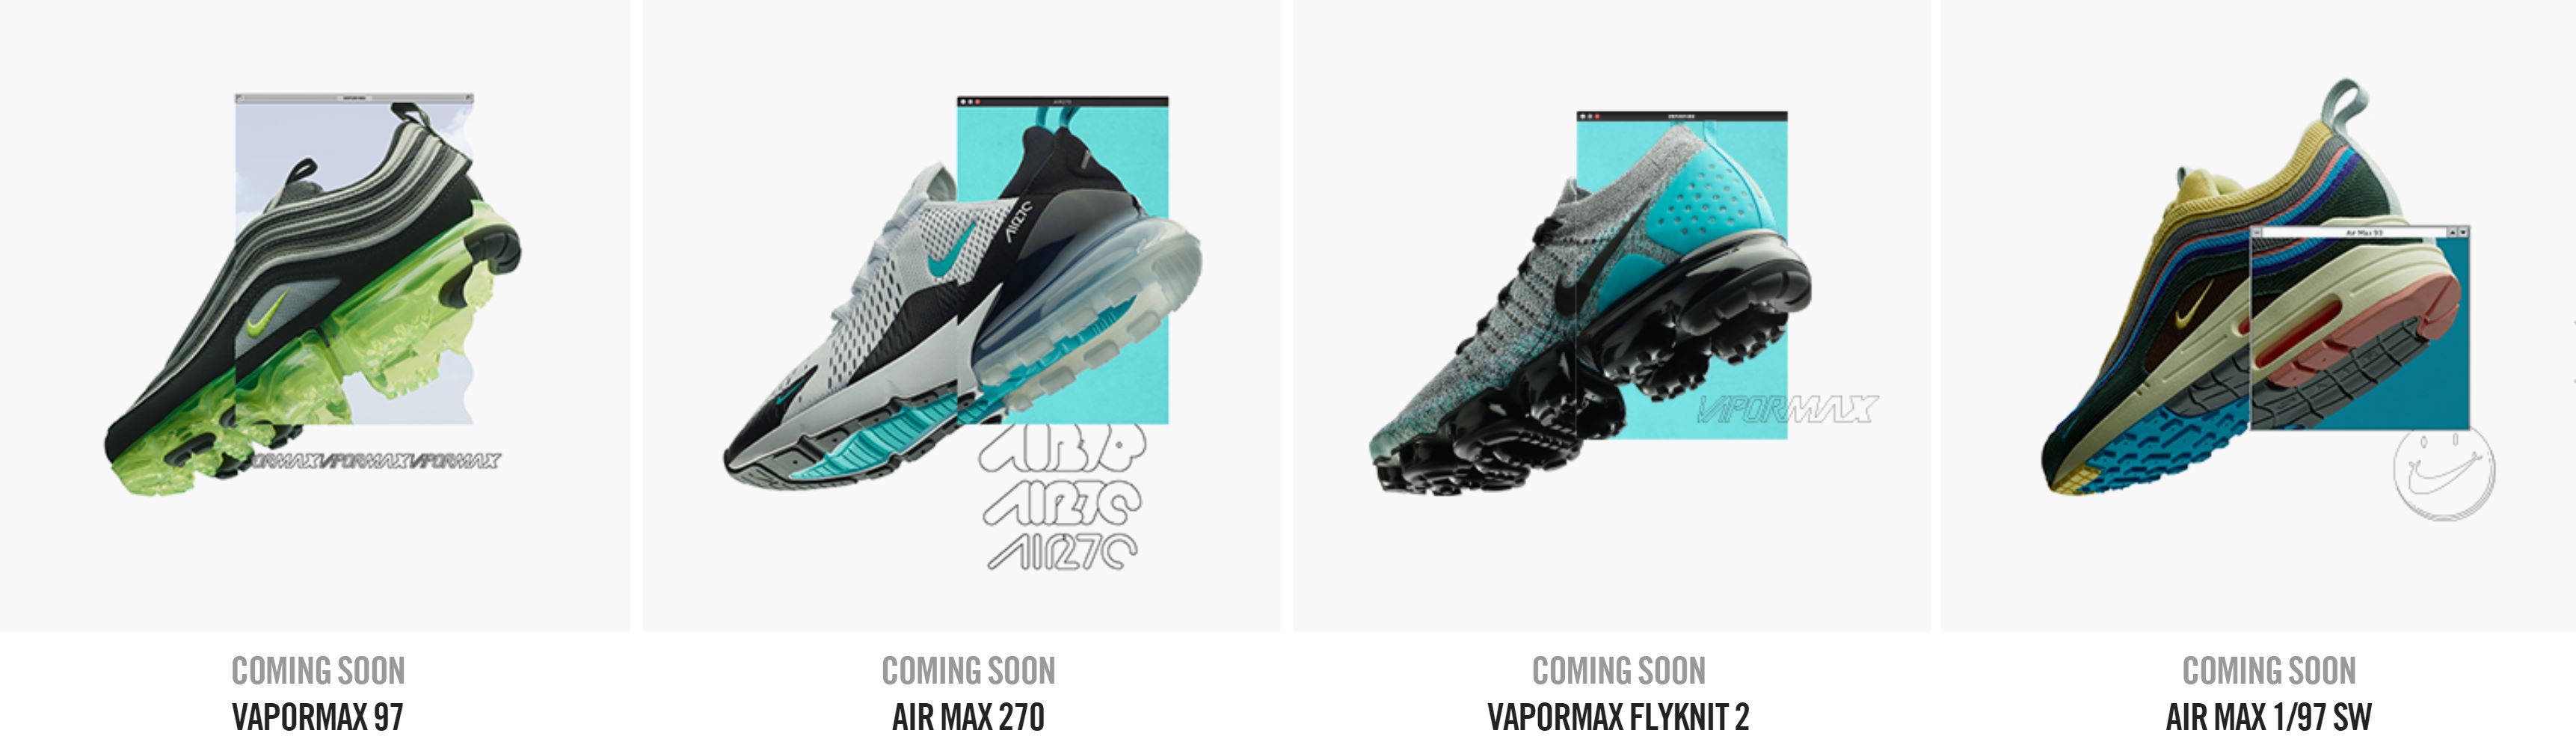 nike air max day 2018 - WearTesters